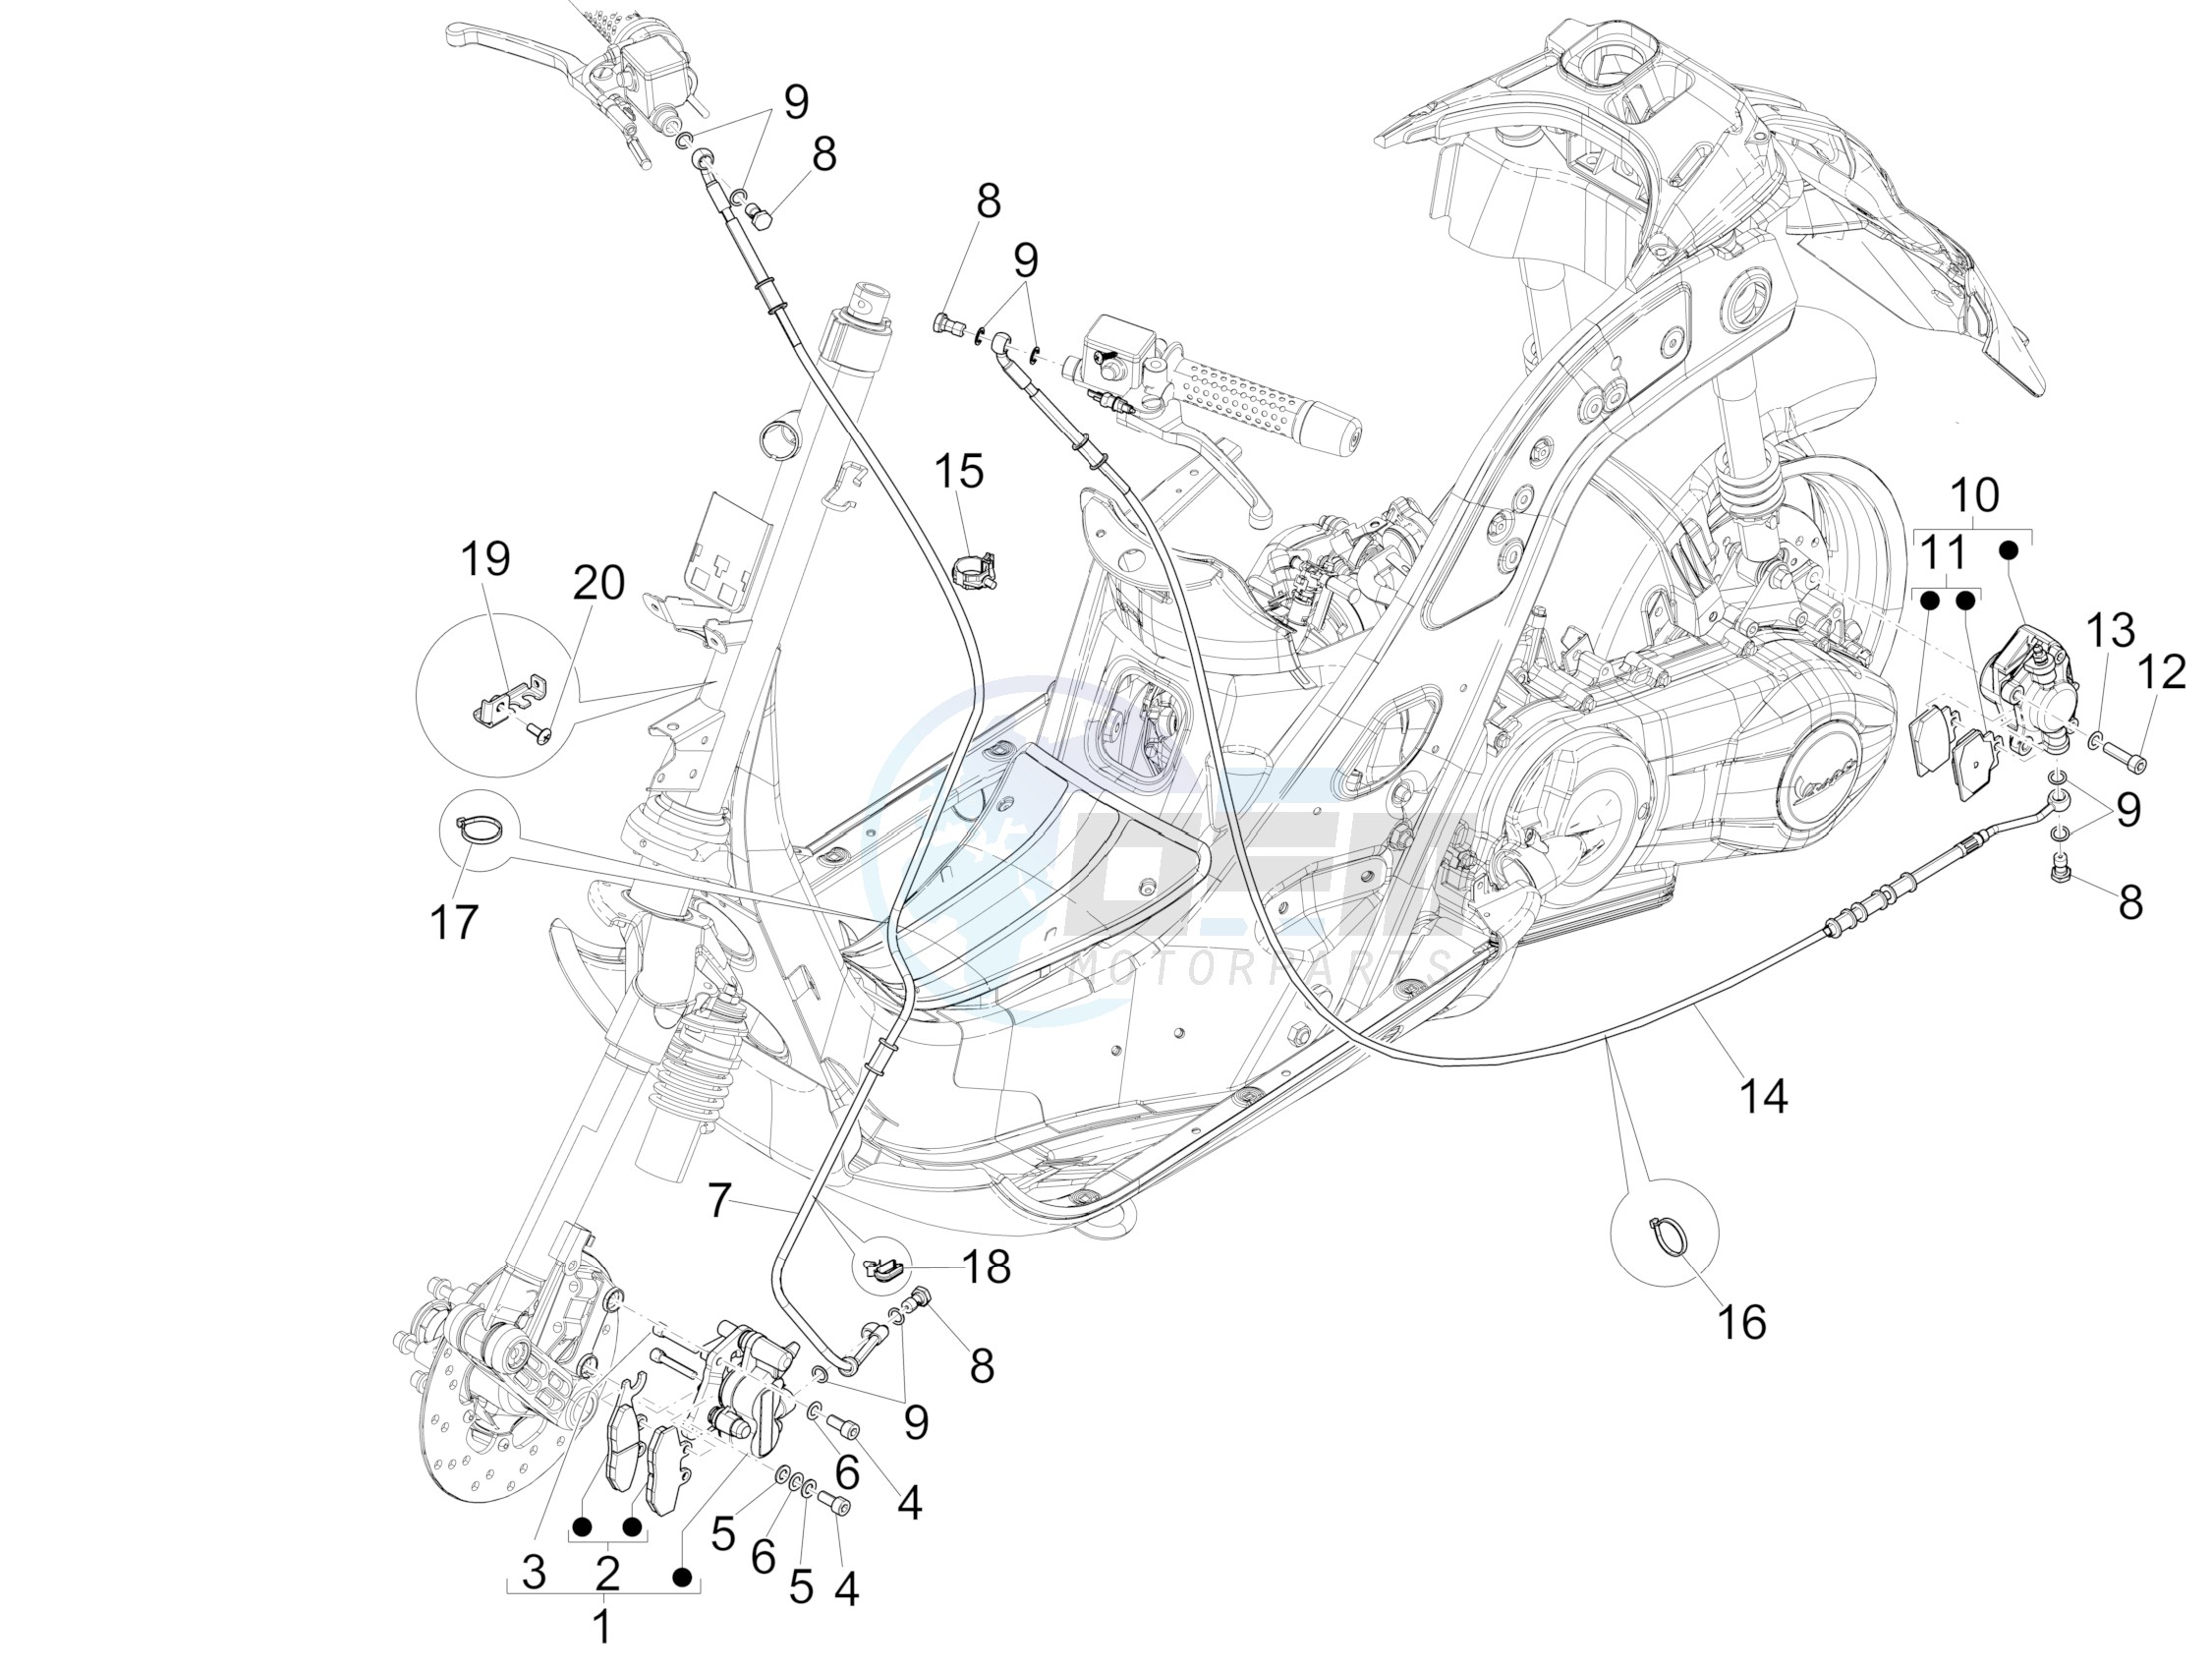 Brakes pipes - Calipers blueprint